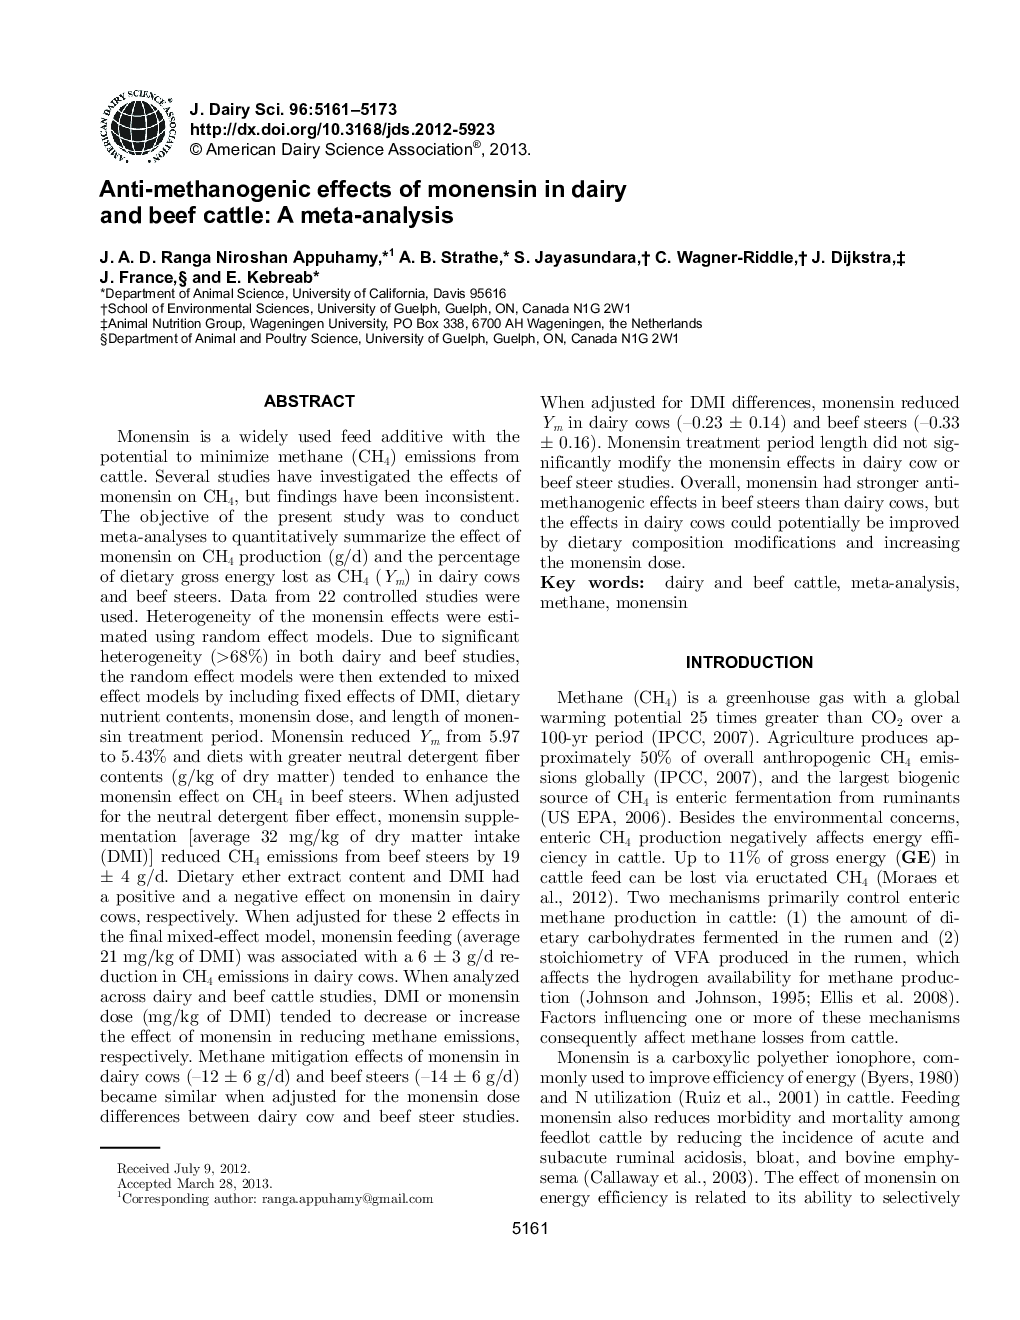 Anti-methanogenic effects of monensin in dairy and beef cattle: A meta-analysis